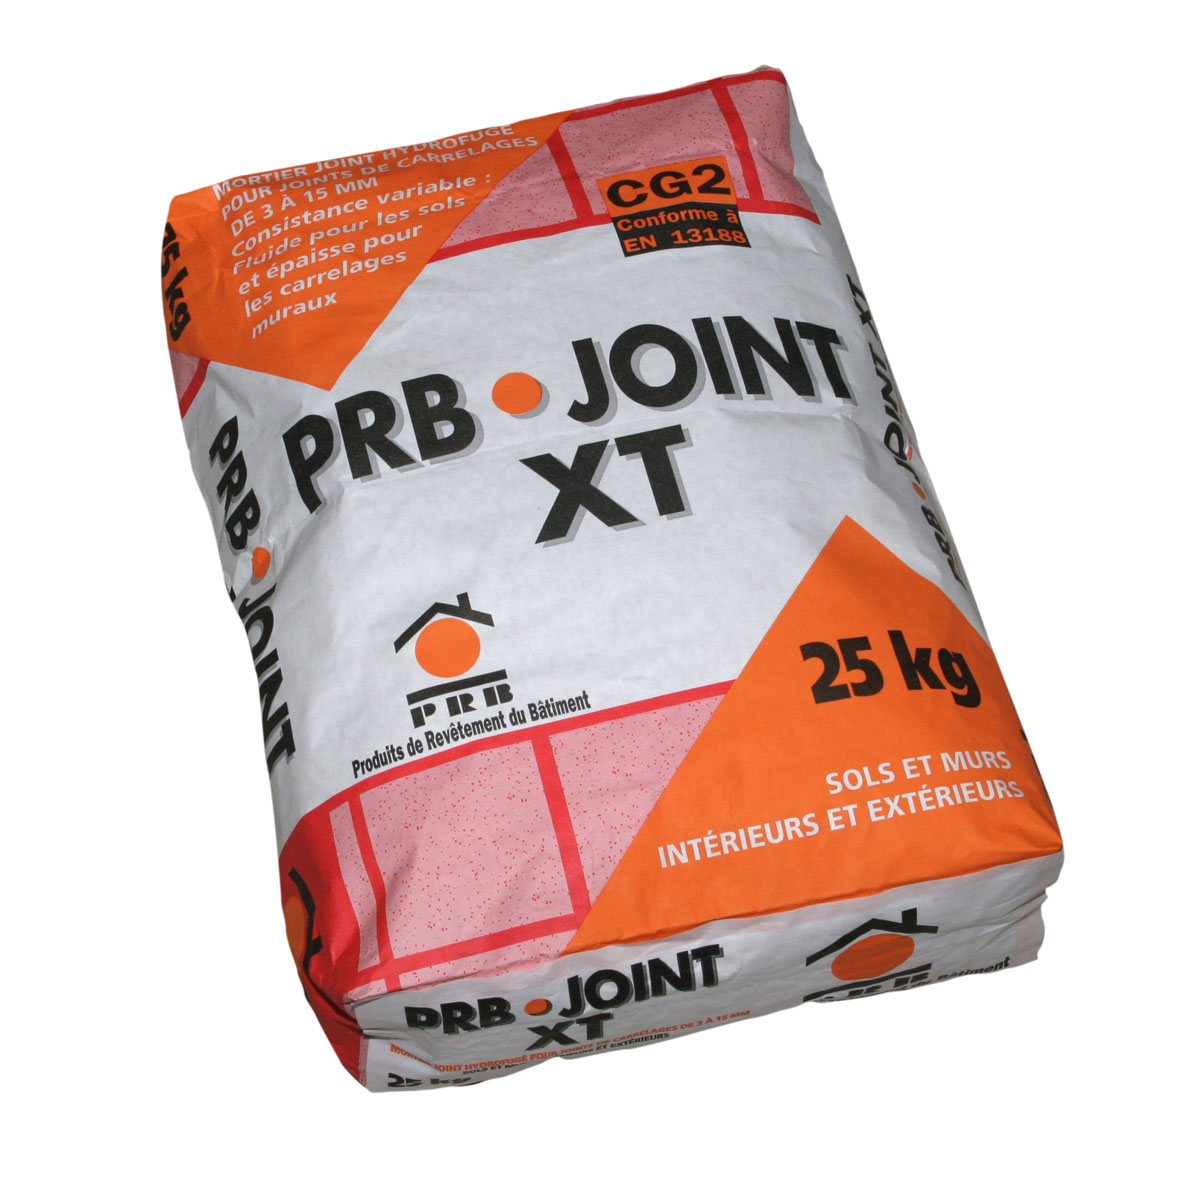 joint-carrelage-prb-joint-xt-25kg-sac-gris-guernesey-0